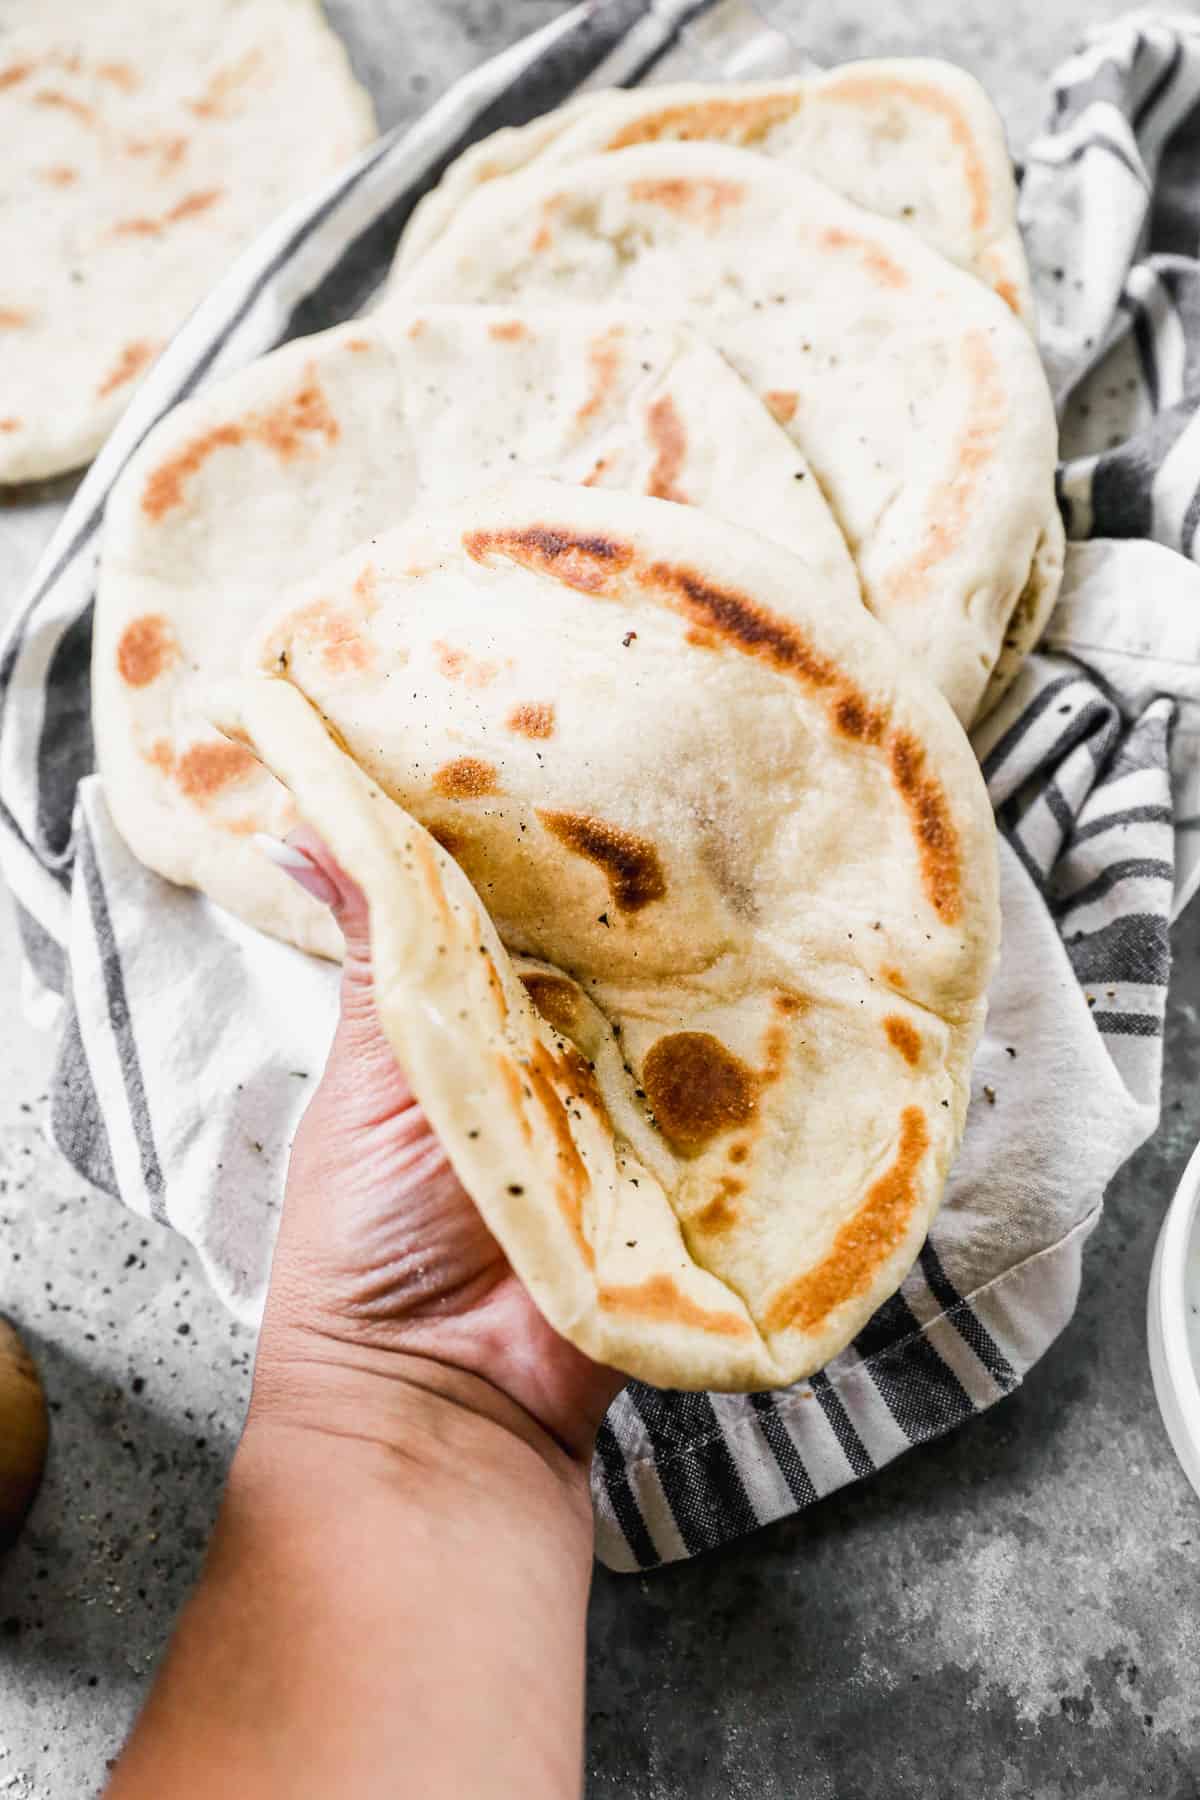 Someone folding a greek pita bread in half with a stack of easy pita breads behind.